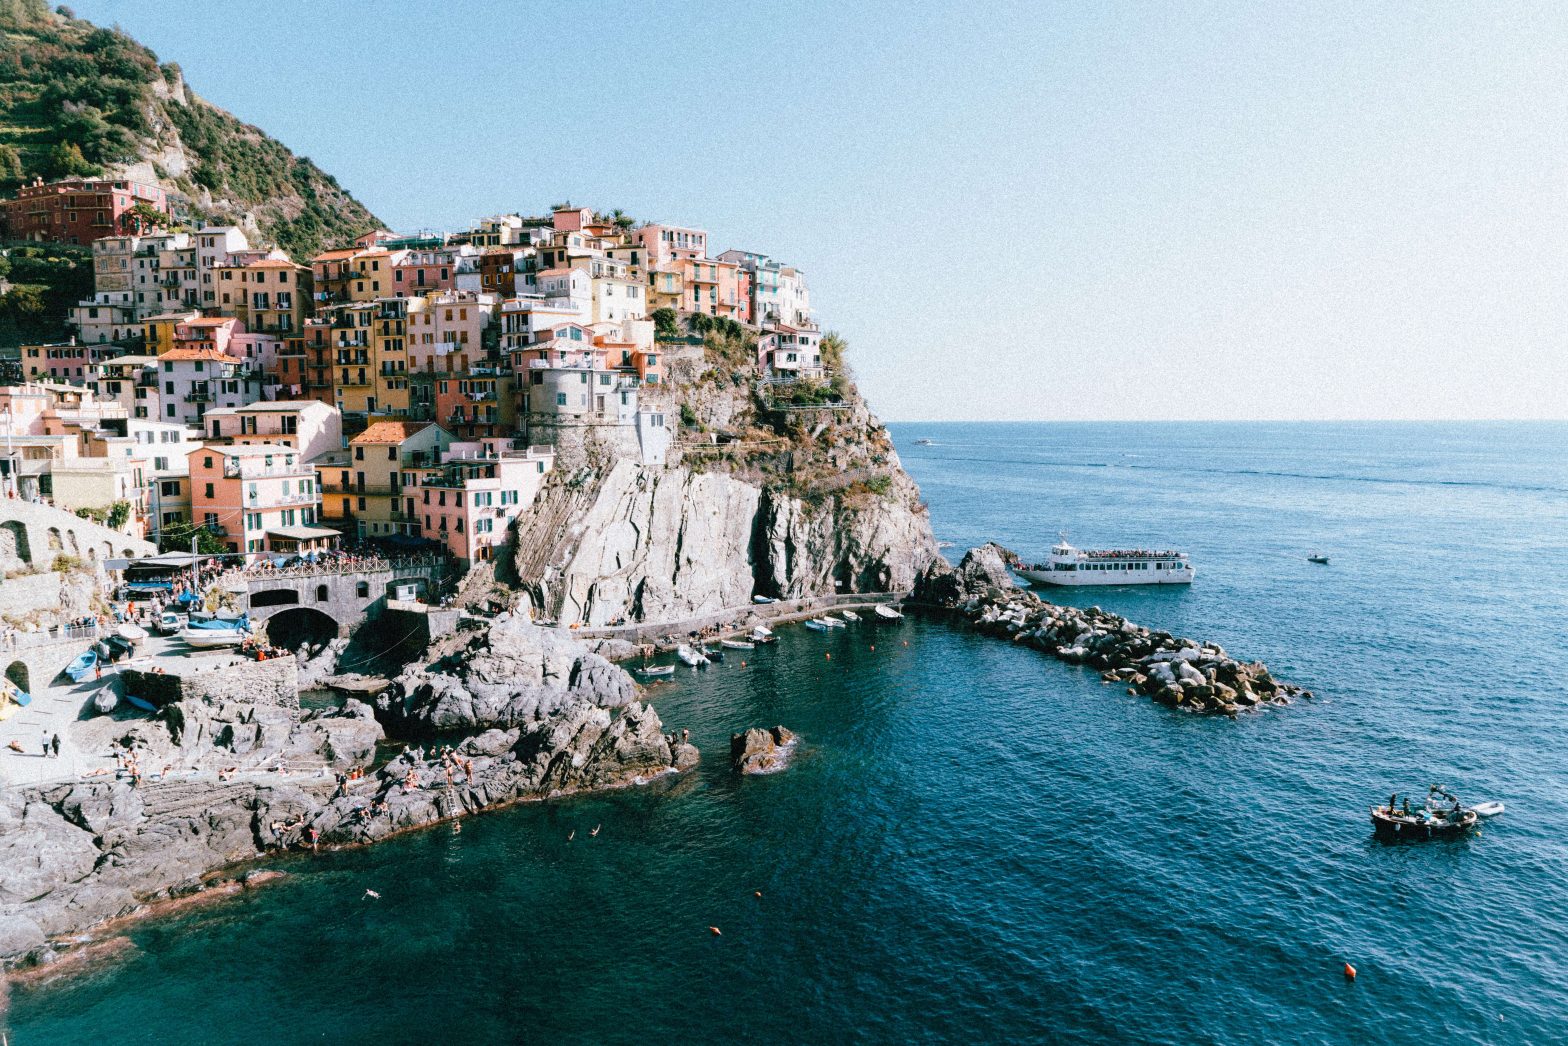 daylight picture of cinque terre